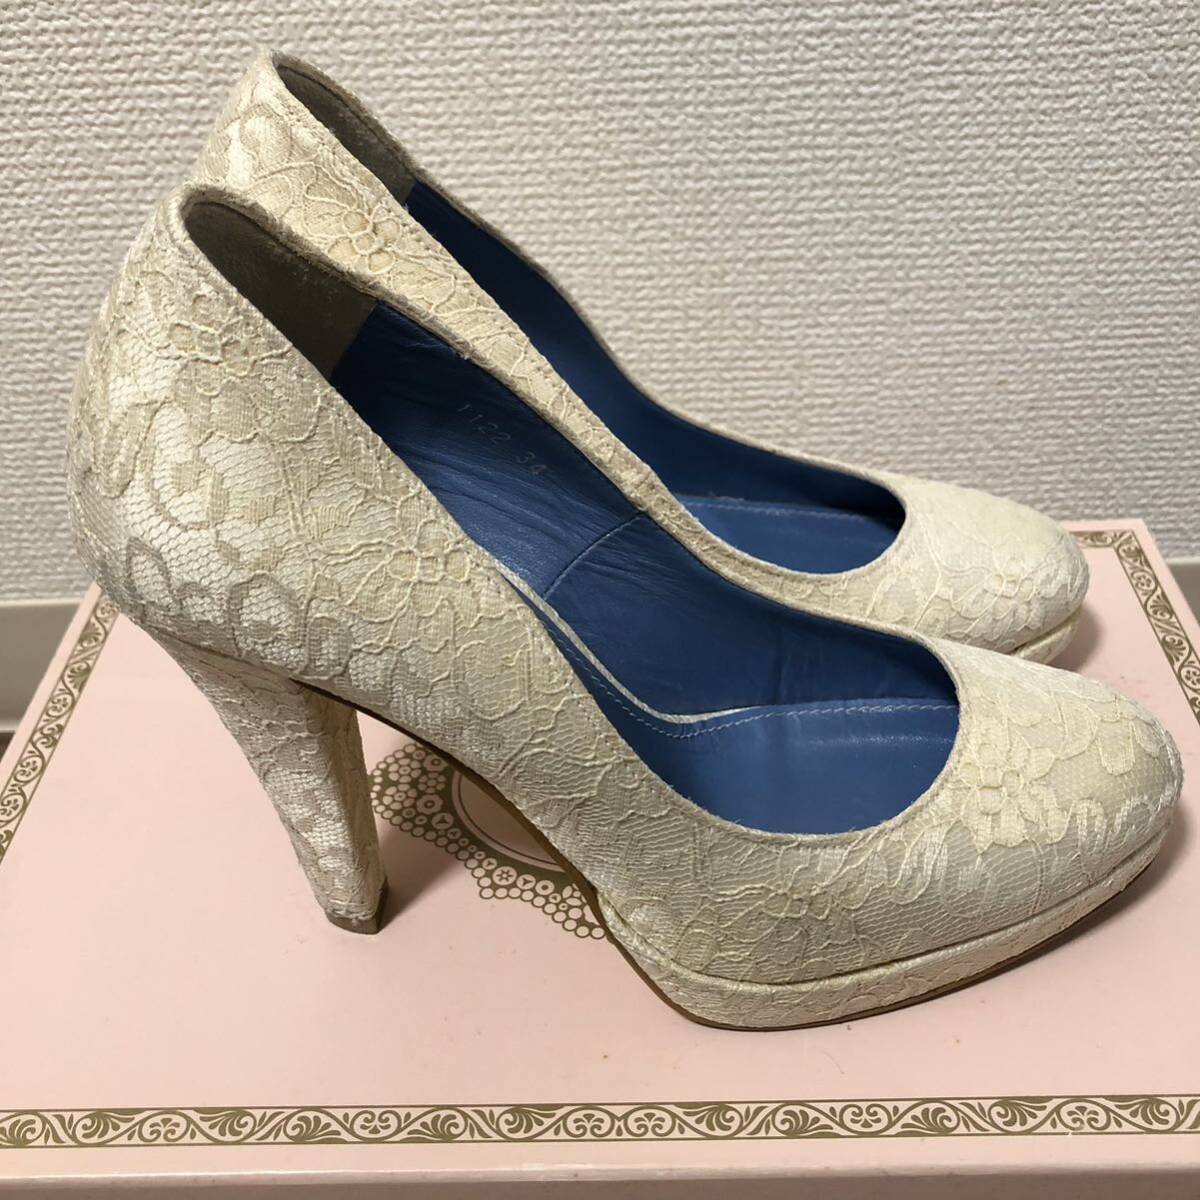 . Neal BENIR wedding shoes new . for small articles new . wedding . type pumps heel pannier ... bride wedding wedding shoes marriage 